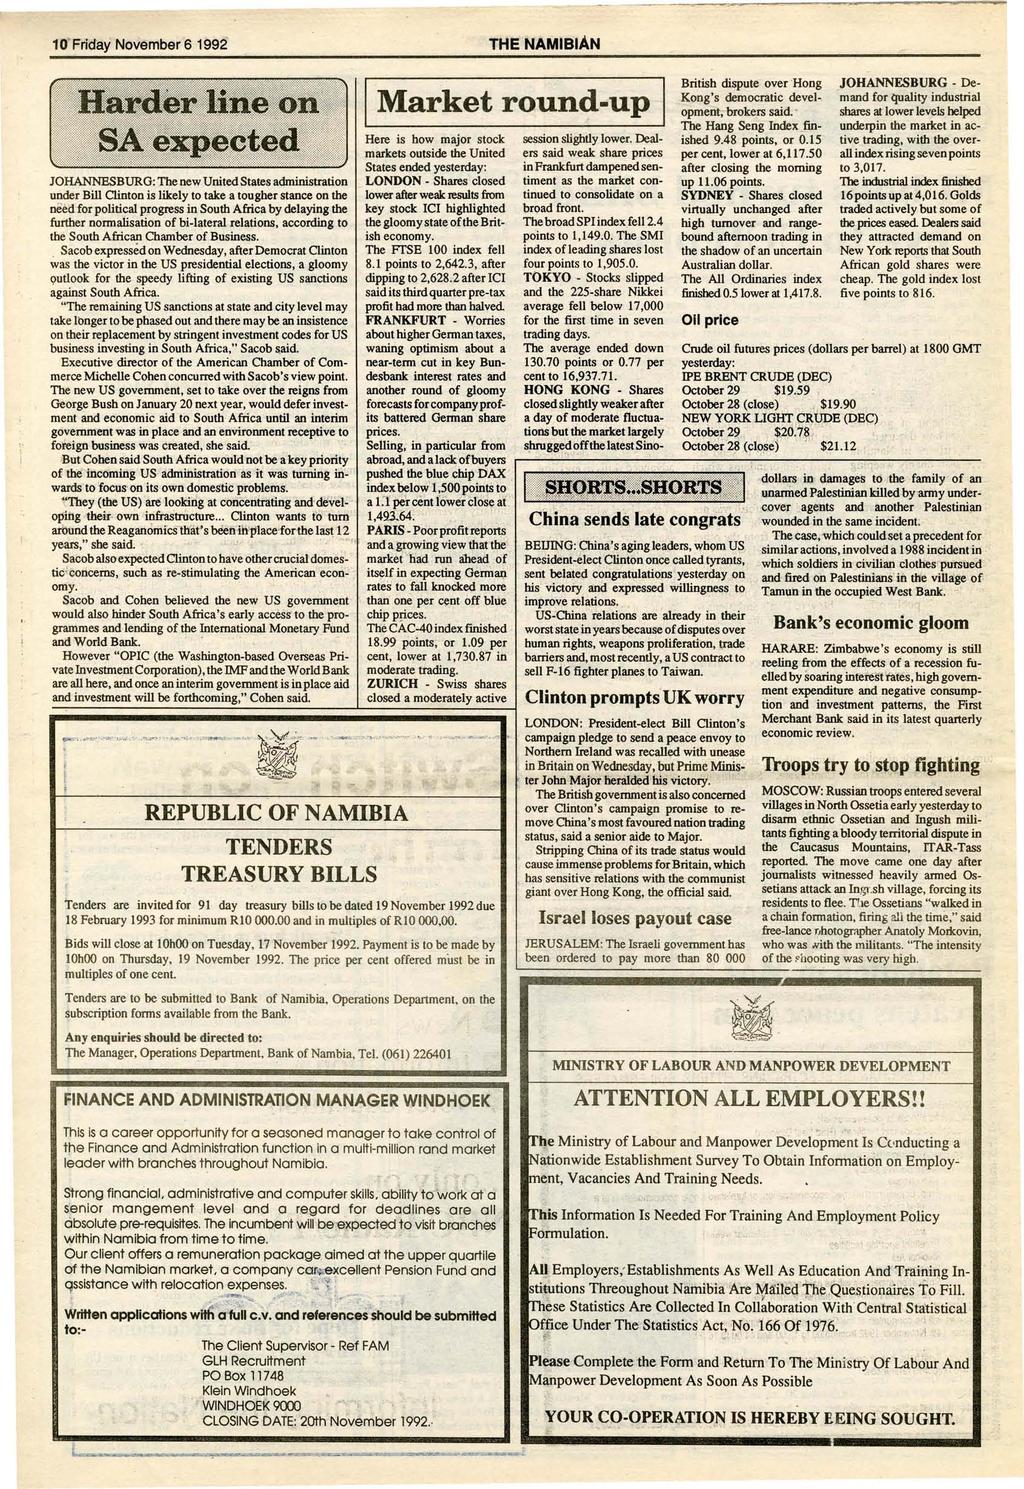 10' Frjday November 6 1992 THENAMIBIAN I Market round-up Here is how major stock markets outside the United States ended yesterday: 10HANNESBURG: The new United States administration LONDON - Shares